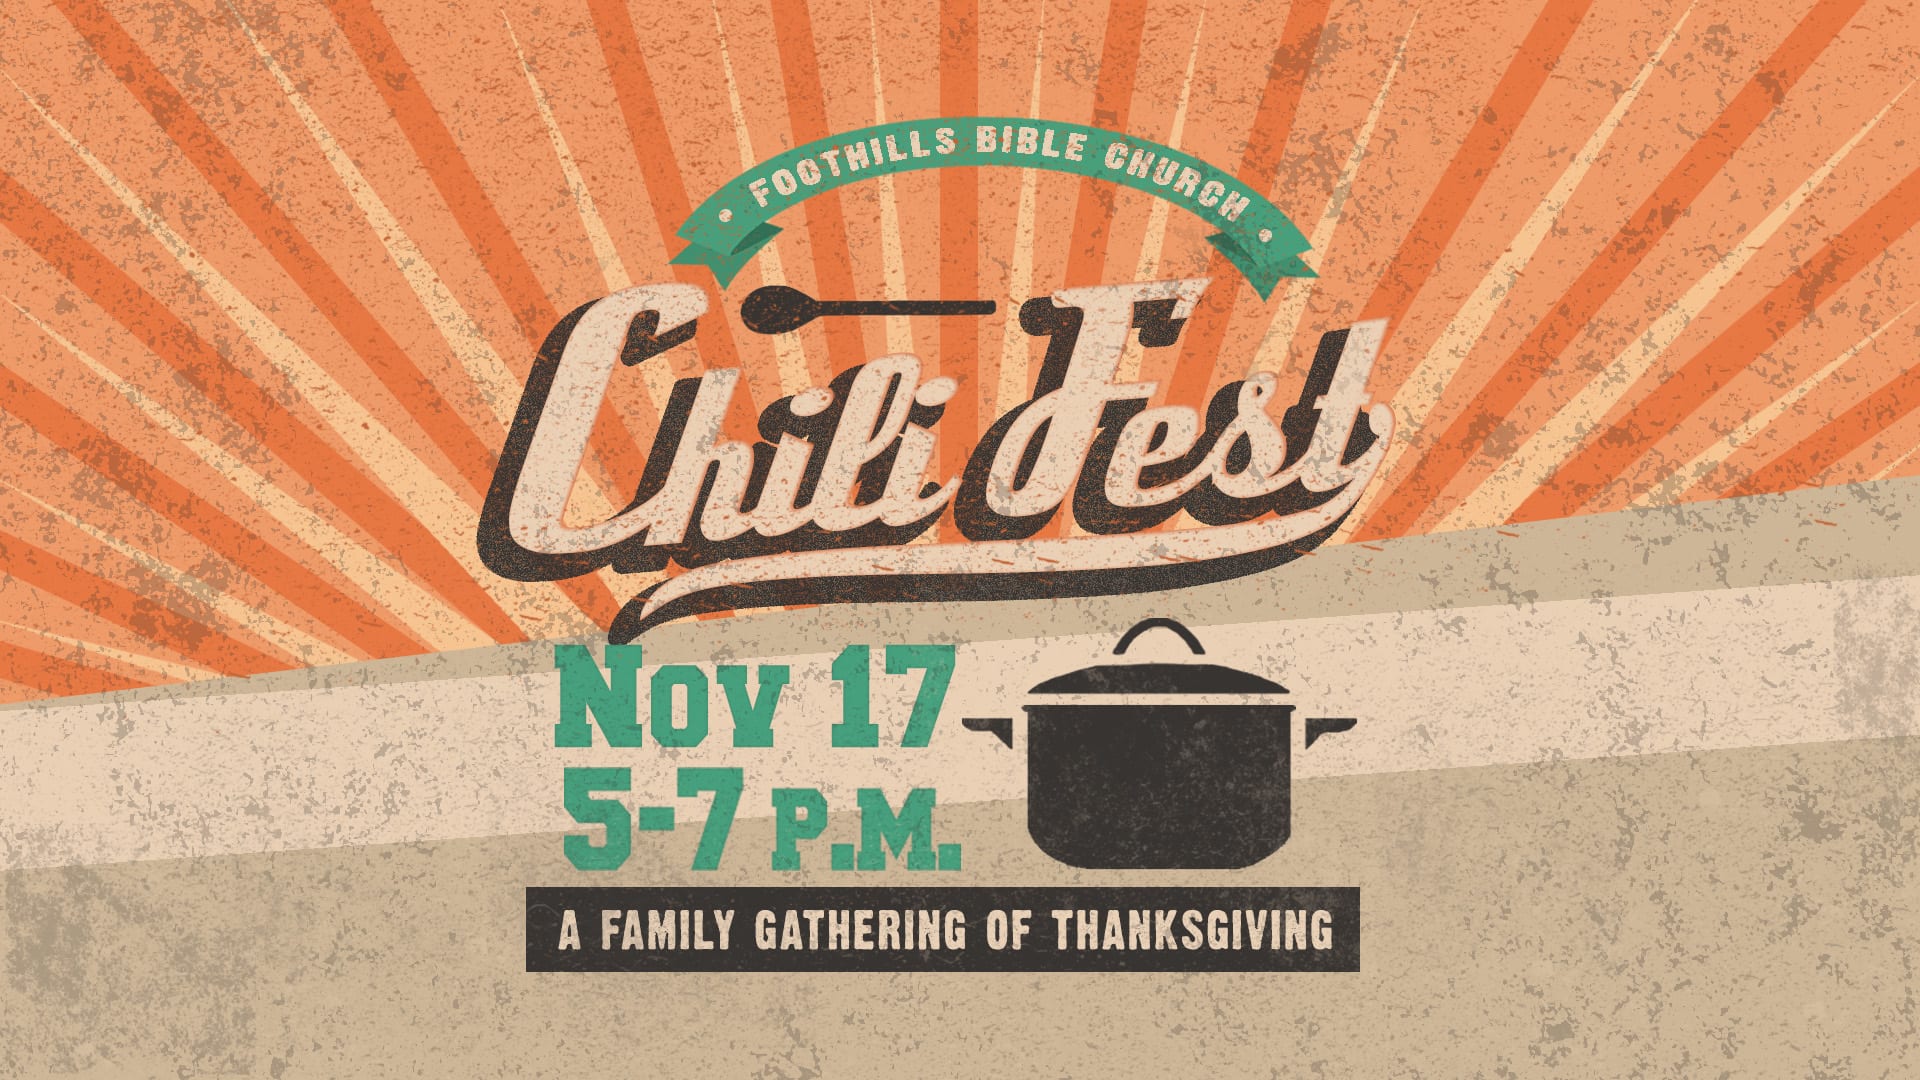 Chili Fest Foothills Bible Church